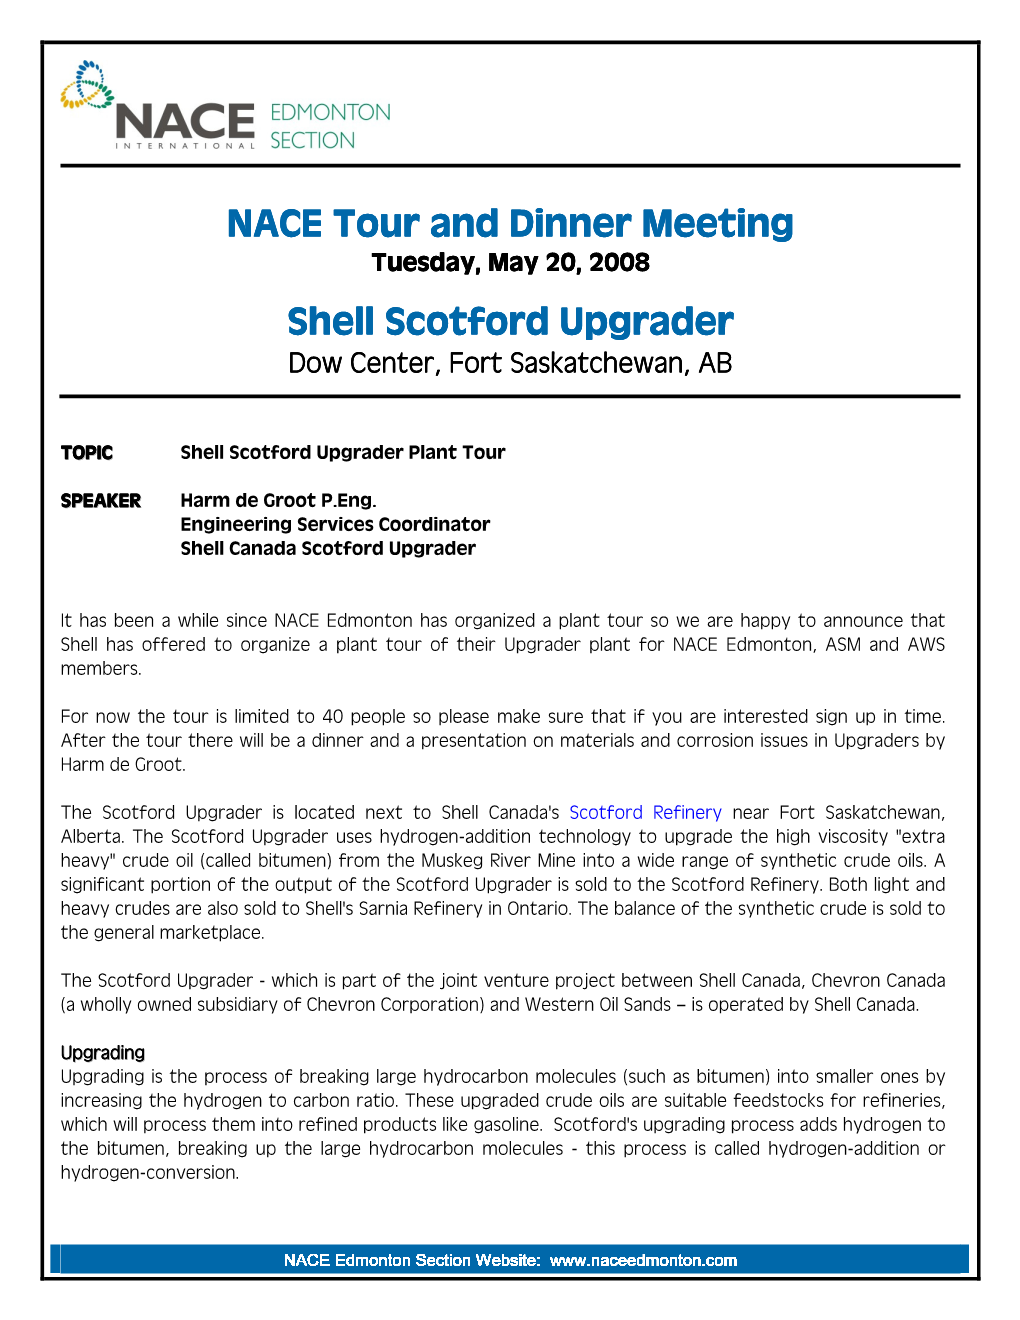 NACE Tour and Dinner Meeting Shell Scotford Upgrader Shell Scotford Upgrader